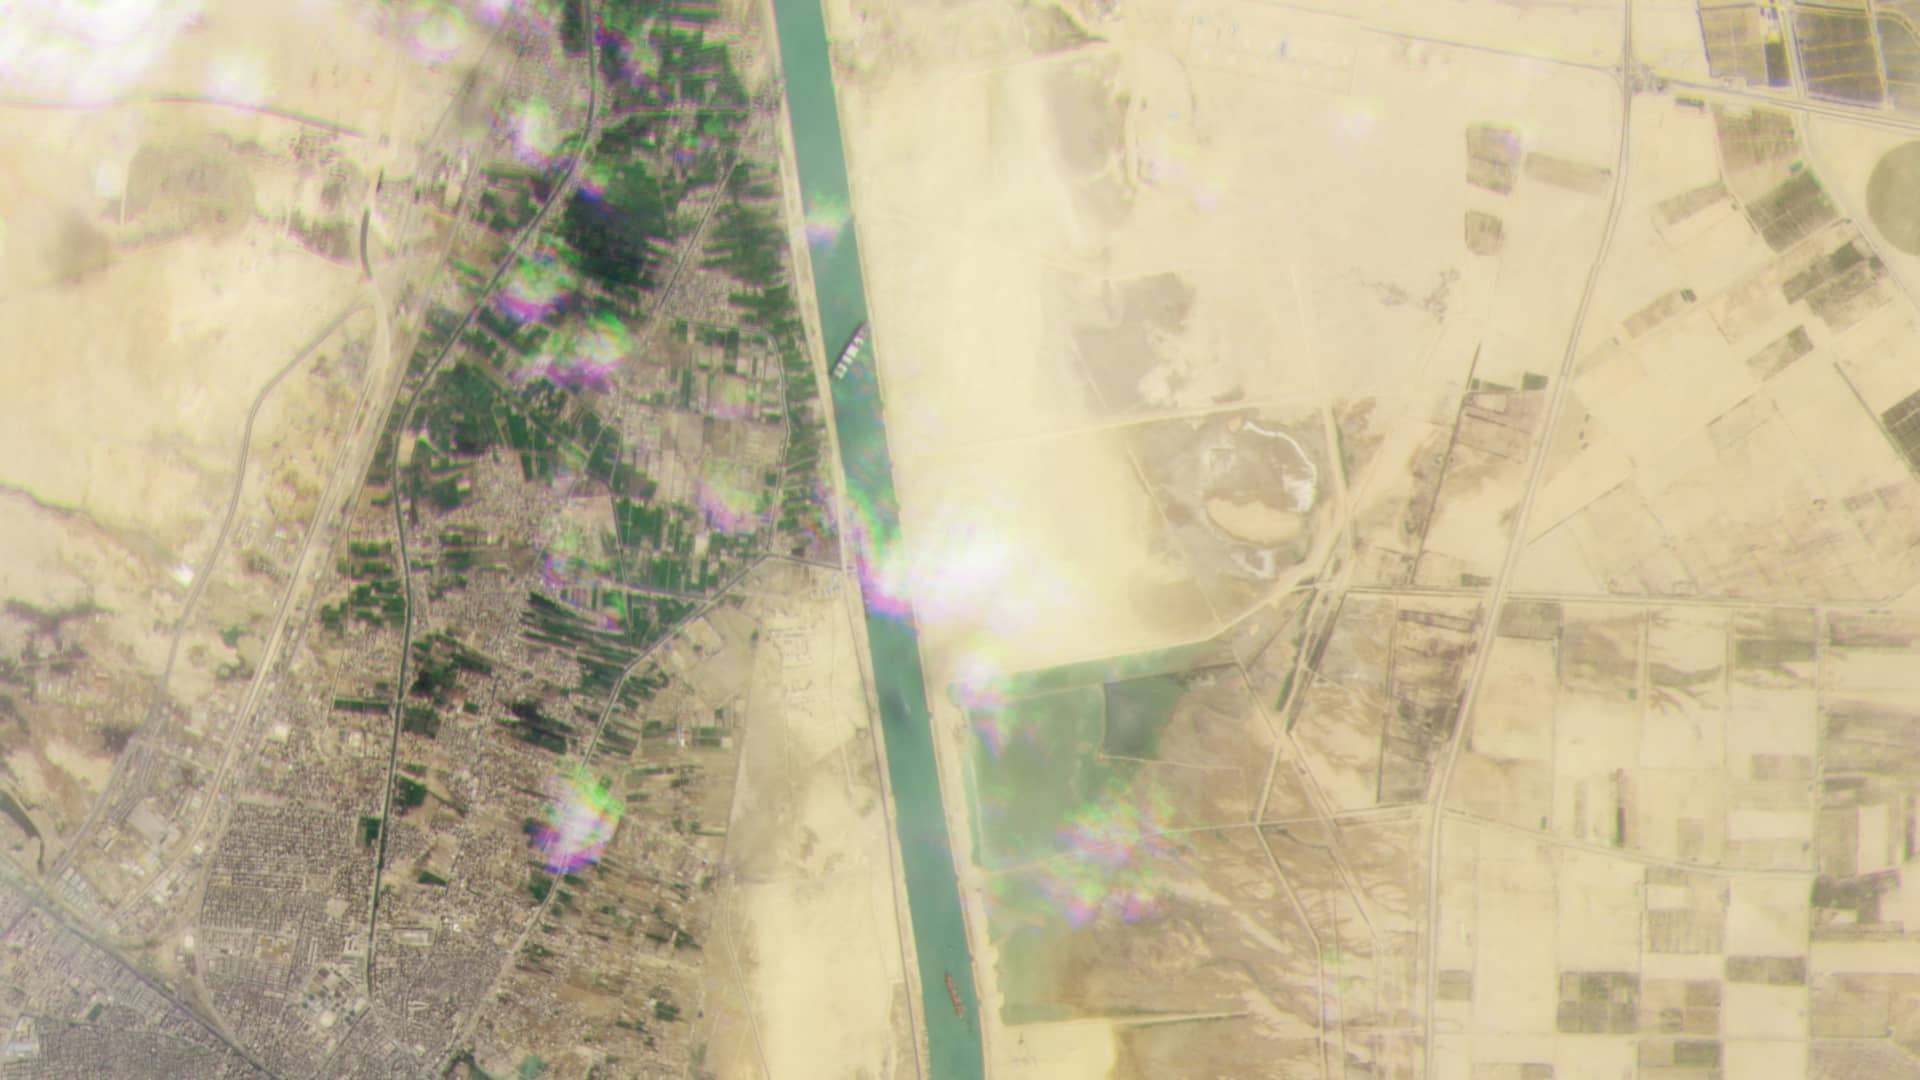 Satellite imagery captured on March 23, 2021 shows the cargo container ship Ever Given blocking the Suez Canal in Egypt.